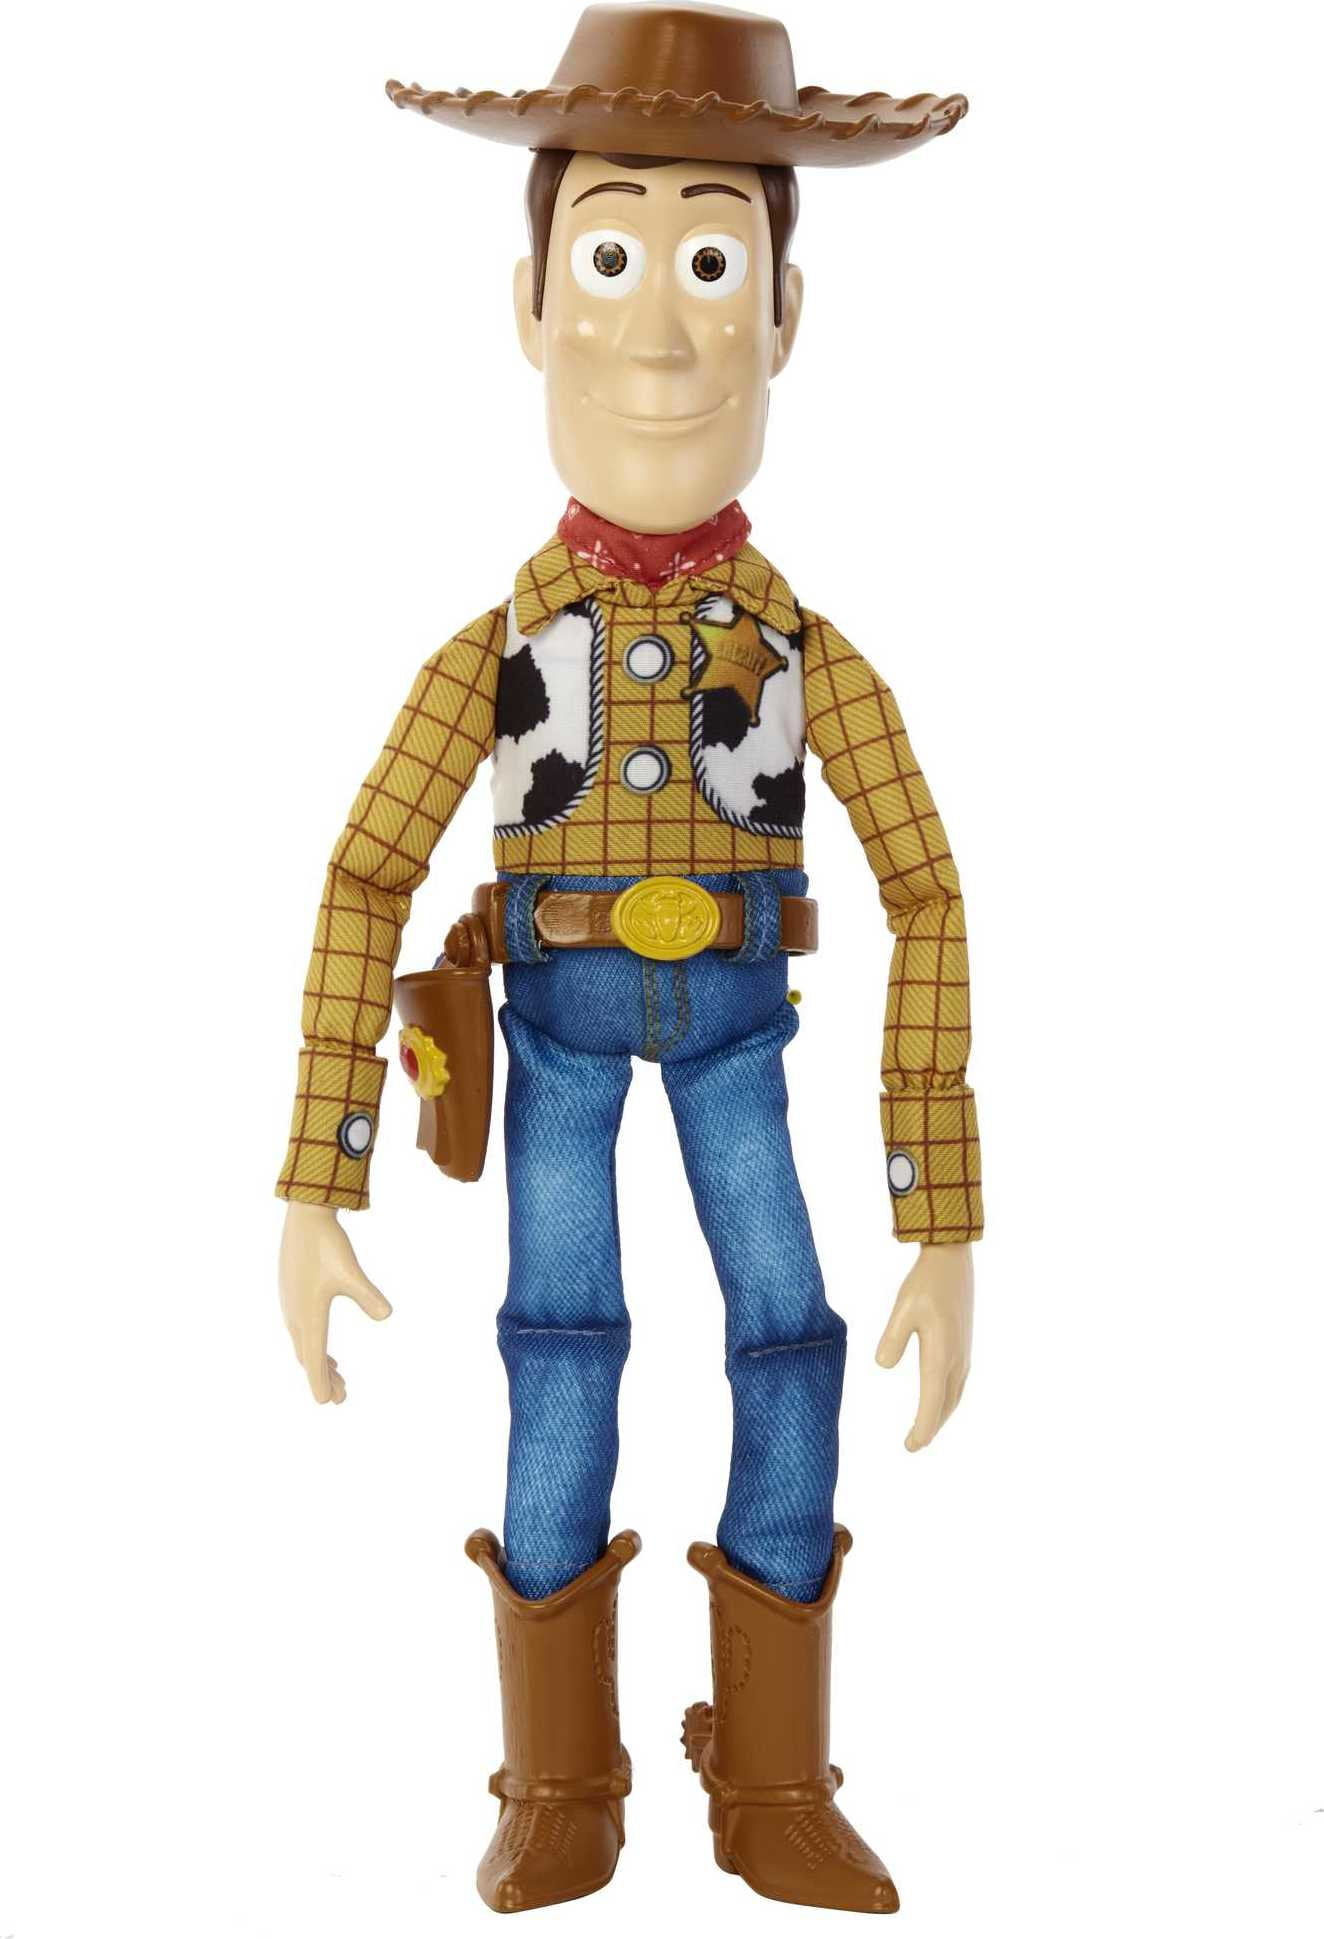 Disney Pixar Toy Story 4 Woody Talking Action Figure 12 Character Phrases for sale online